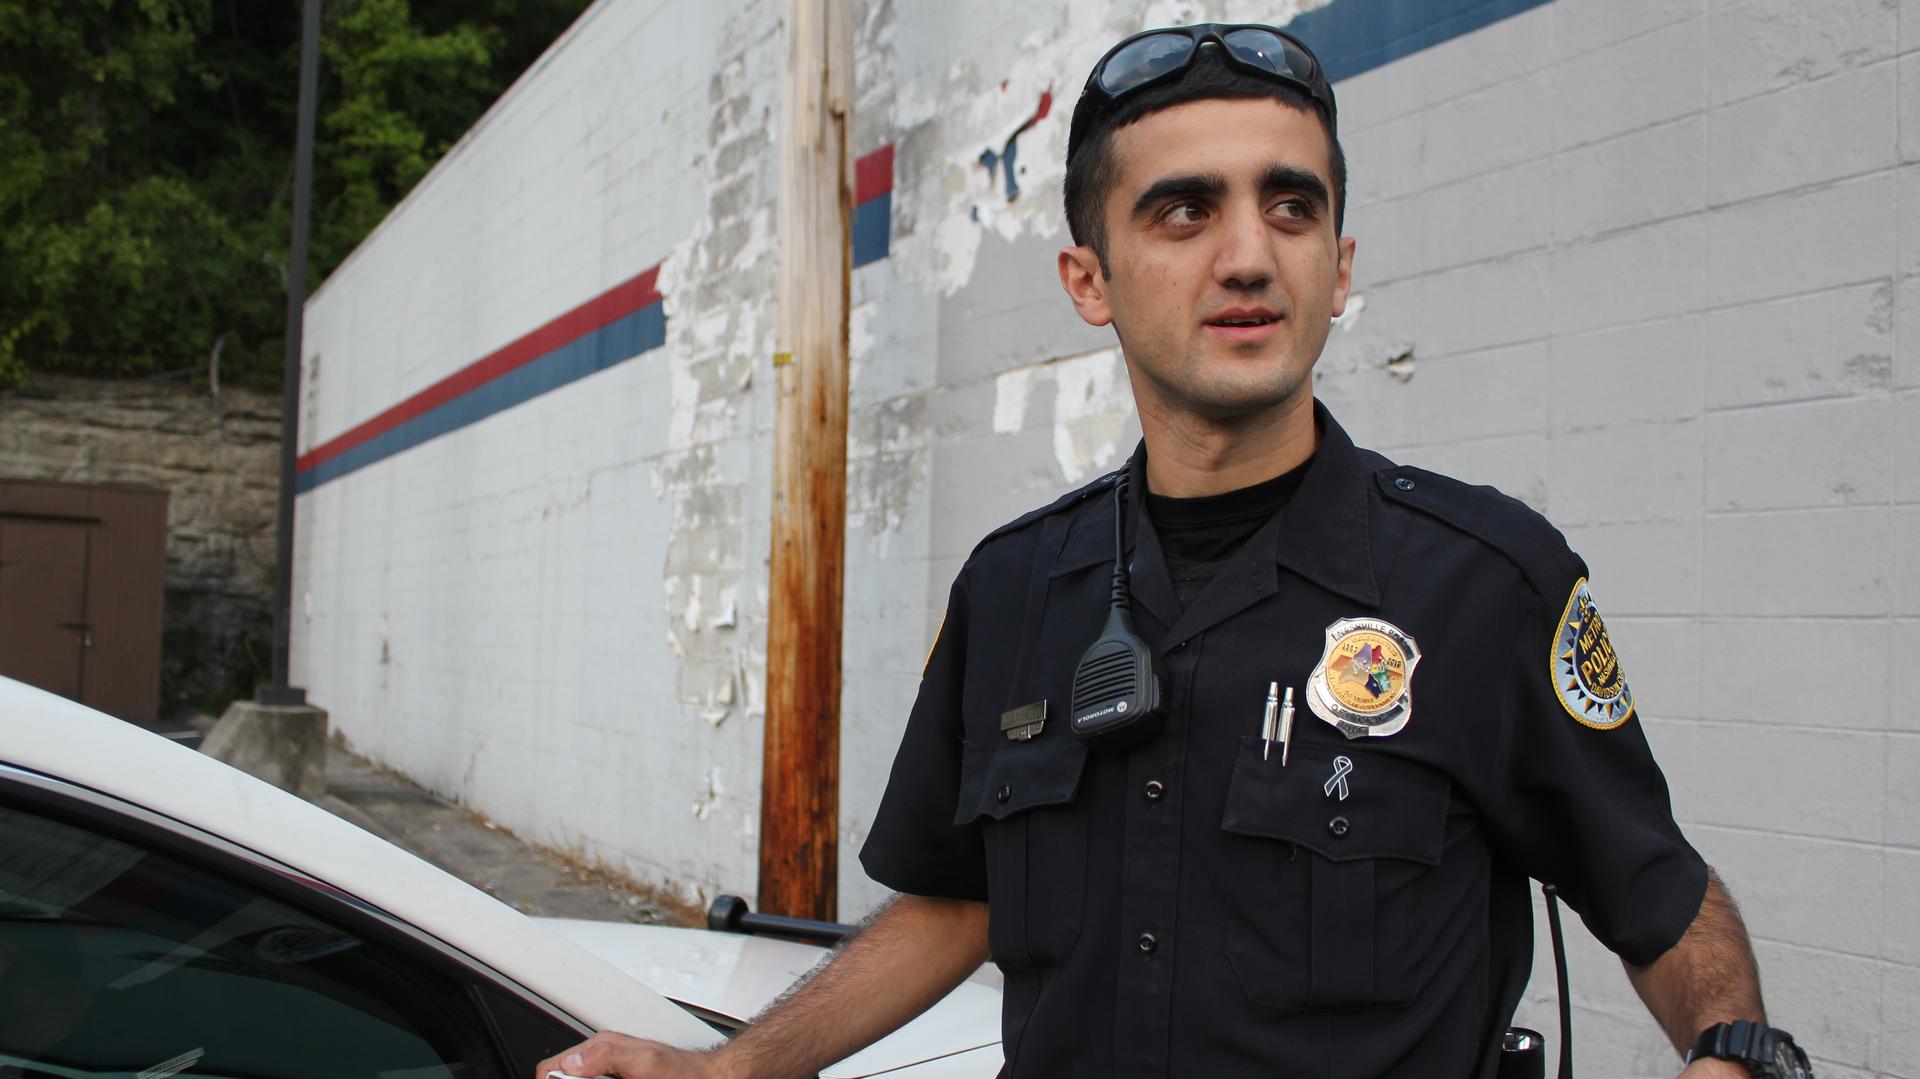 Jiyayi Suleyman, 26, is Nashville’s first Kurdish American police officer. “I took this job to bridge the gap between not only the Kurdish community but the Muslim community with the police department,” Suleyman says. “I wanted to be that one guy that mak